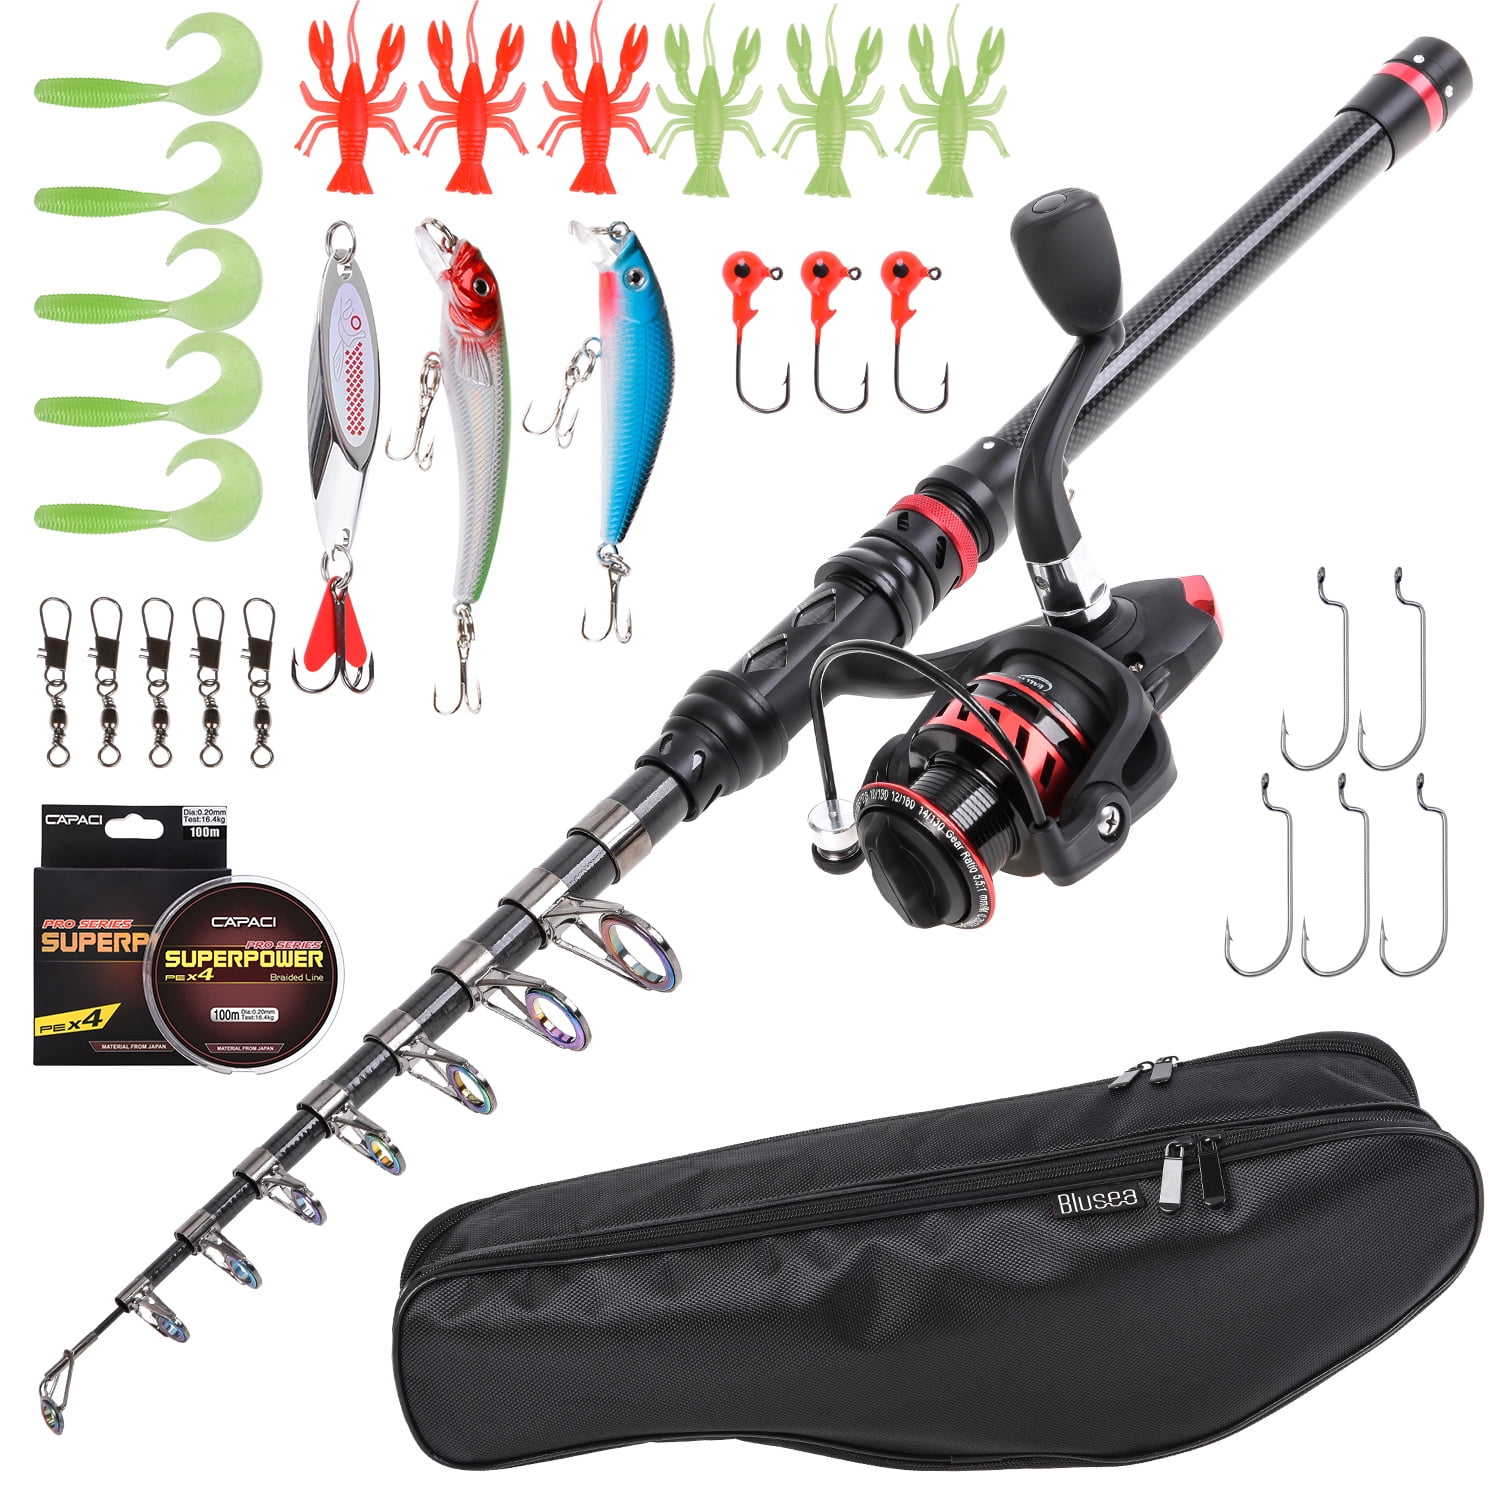 Telescopic Spinning Fishing Pole Rod and Reel Combo Set FULL KIT with Lures Jigs 